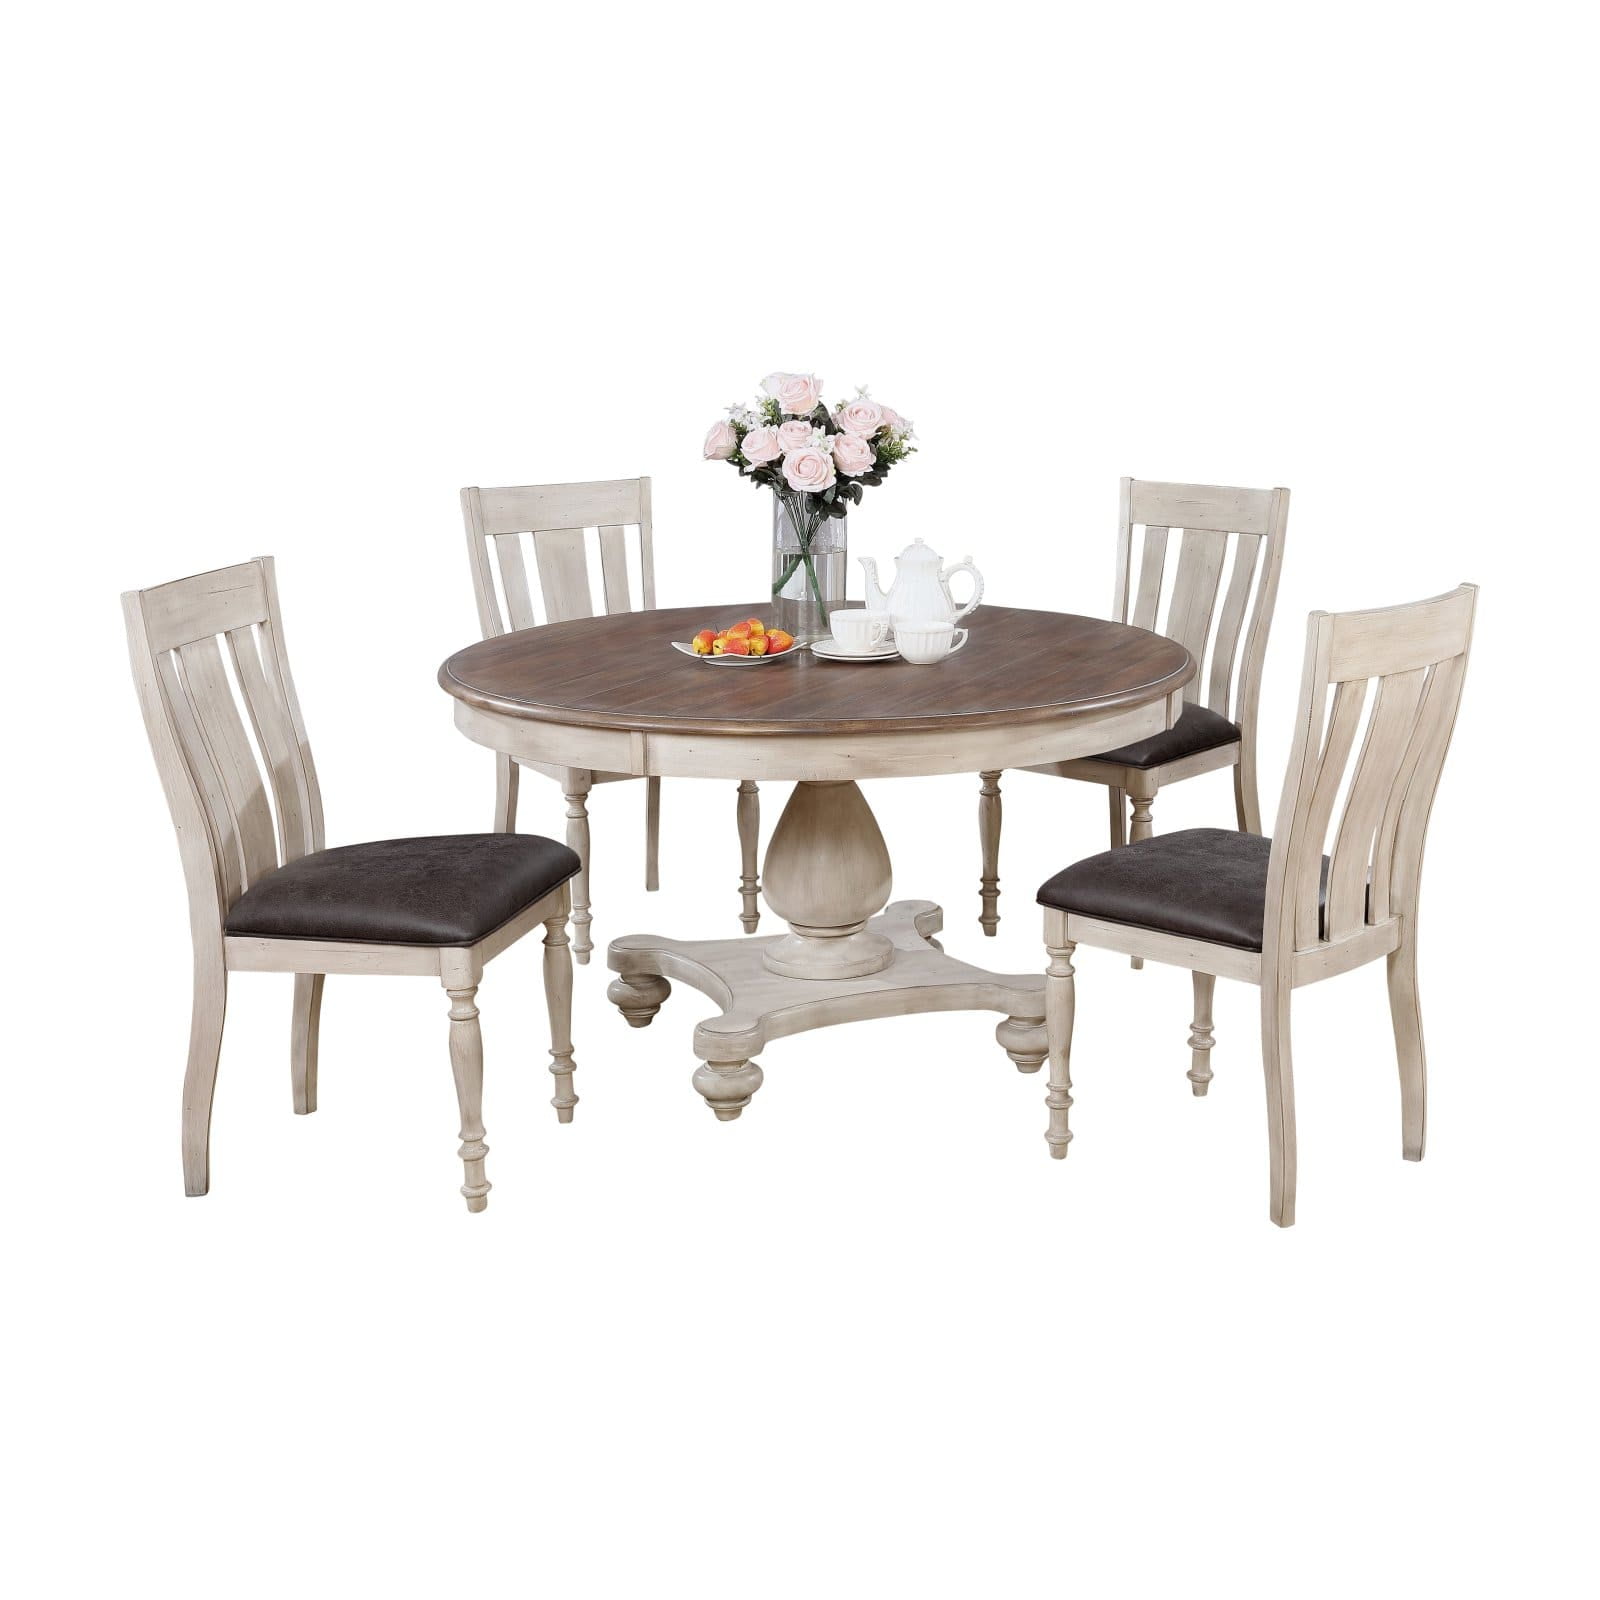 Arch Weathered Oak Dining Set Round, Dining Sets Round Table